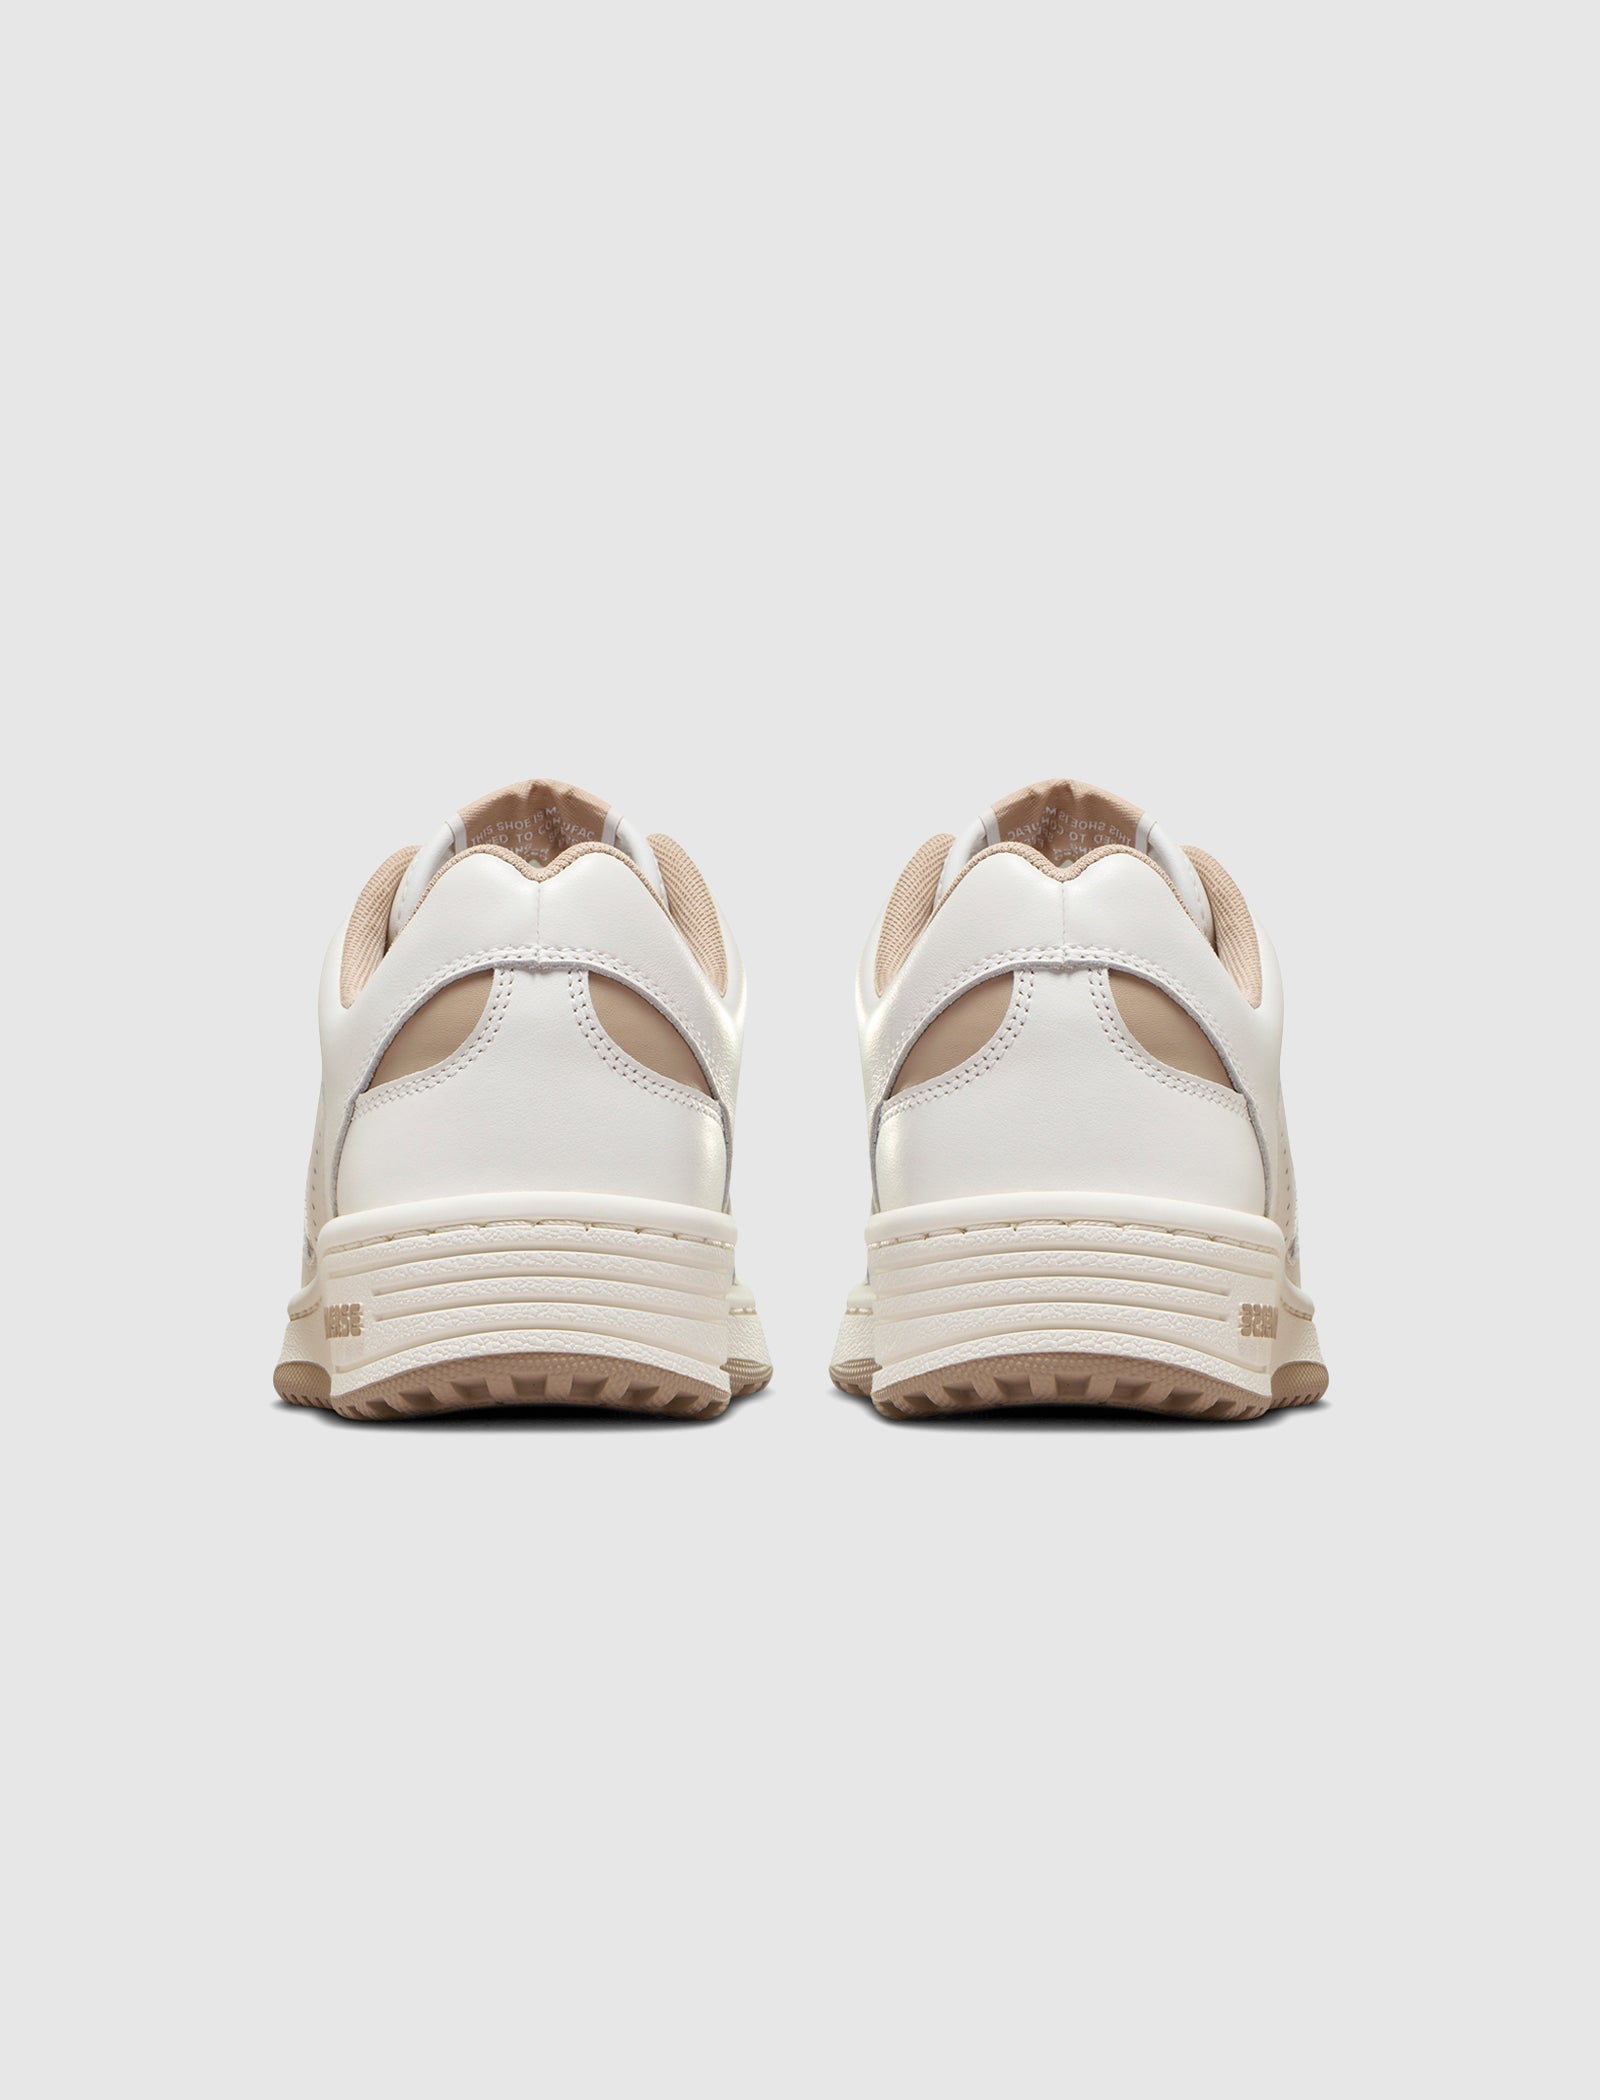 WEAPON OX "NATURAL IVORY/VINTAGE CARGO"